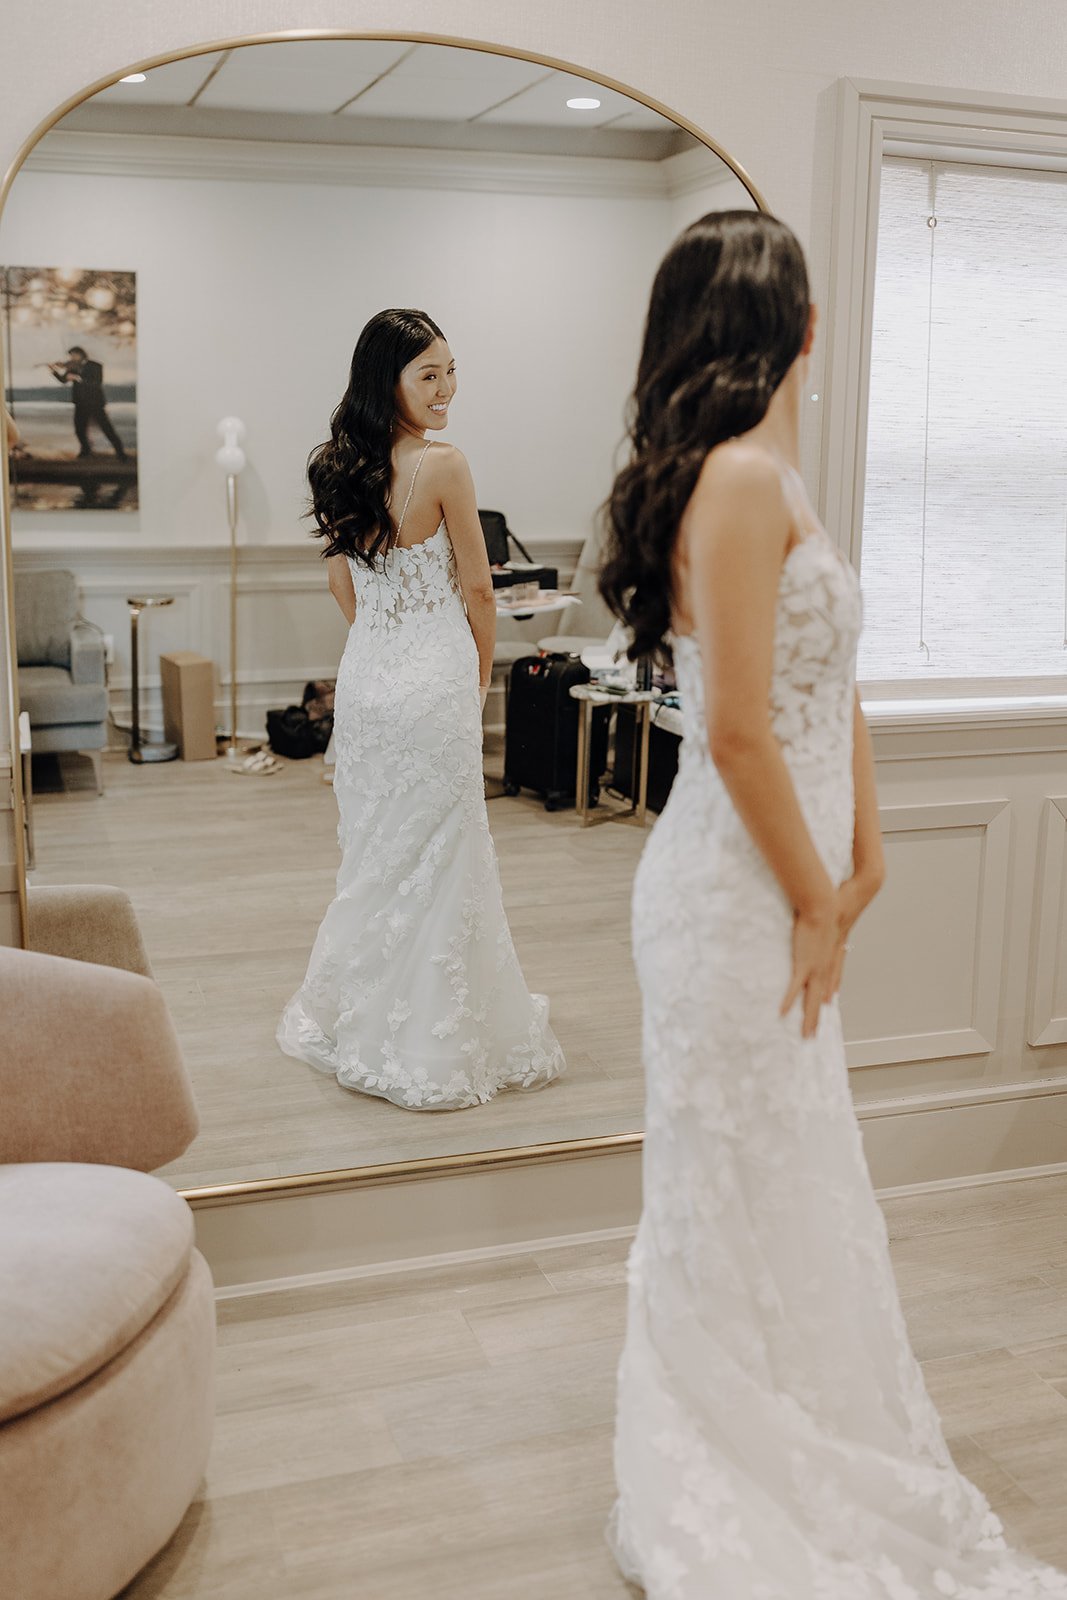 Bride looking at herself in the mirror while getting ready for city wedding at NY wedding venue